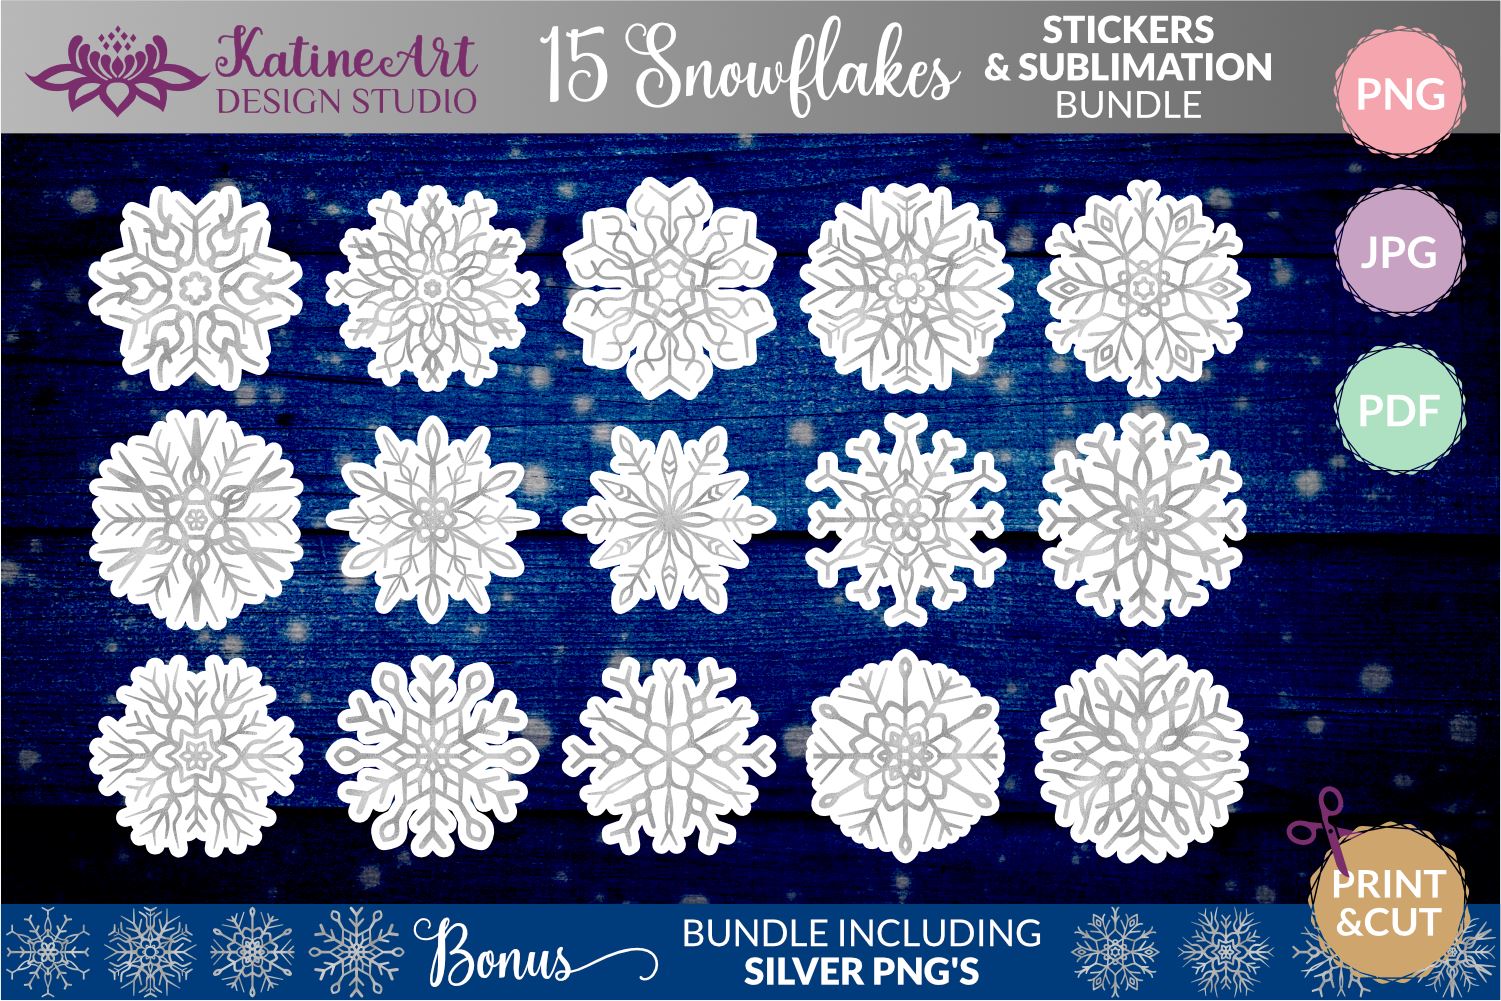 Snowflake Stickers by Recollections™